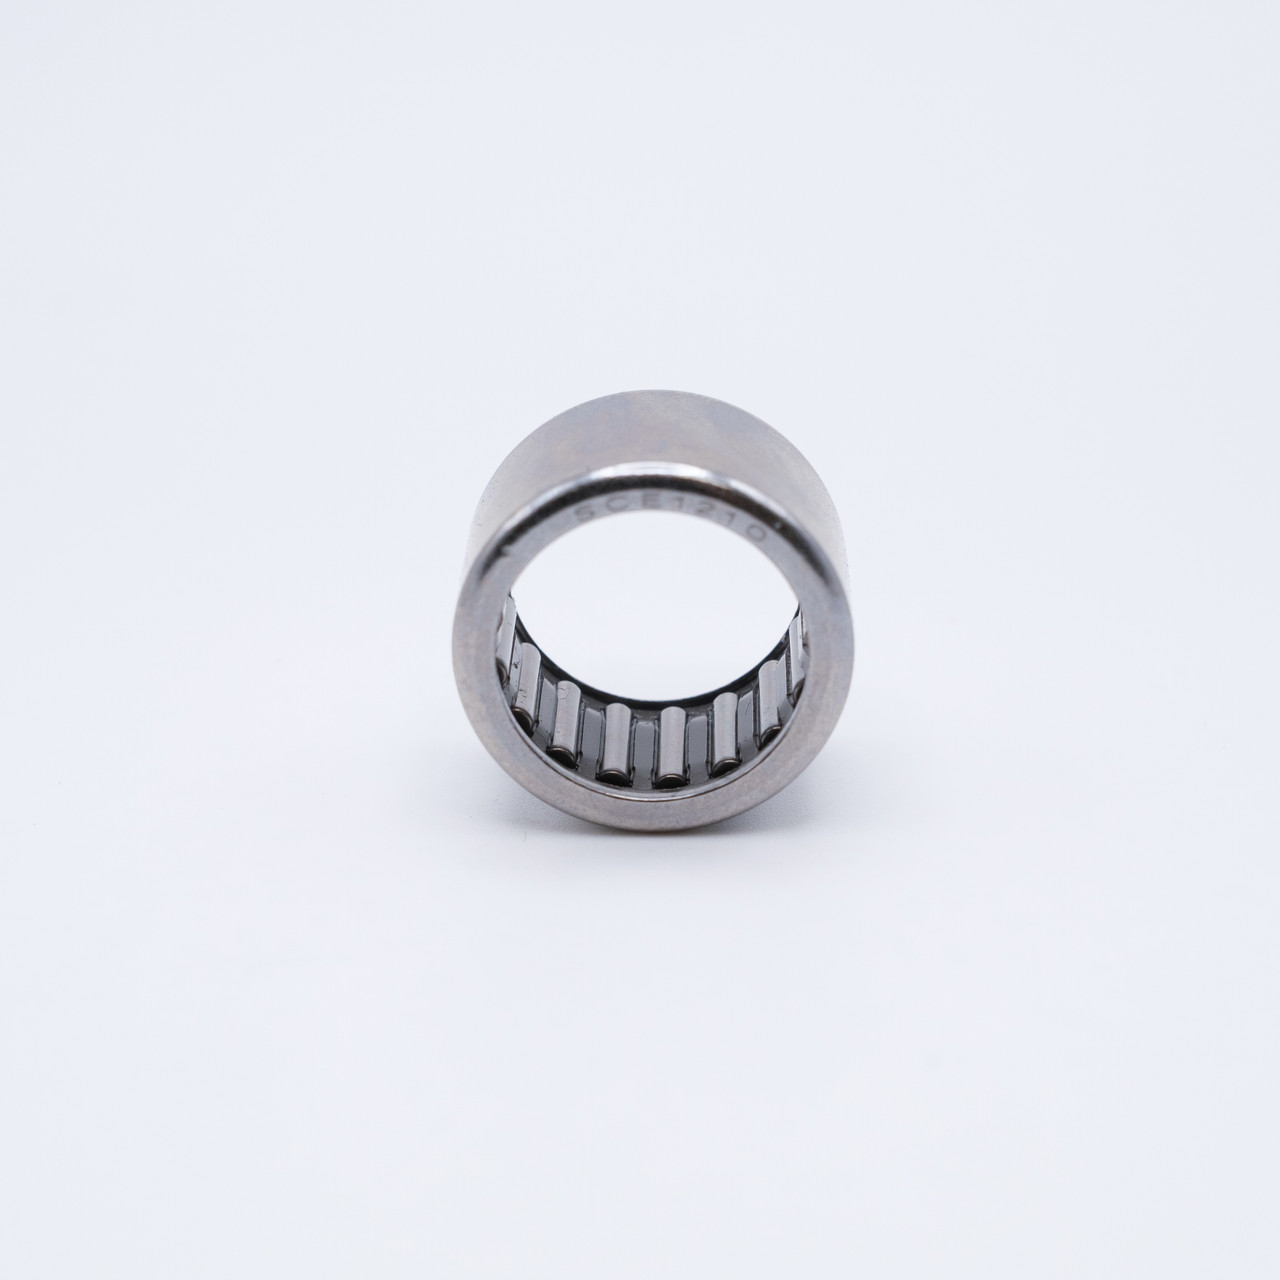 J1612 Needle Roller Bearing 1x1-1/4x3/4 Front View